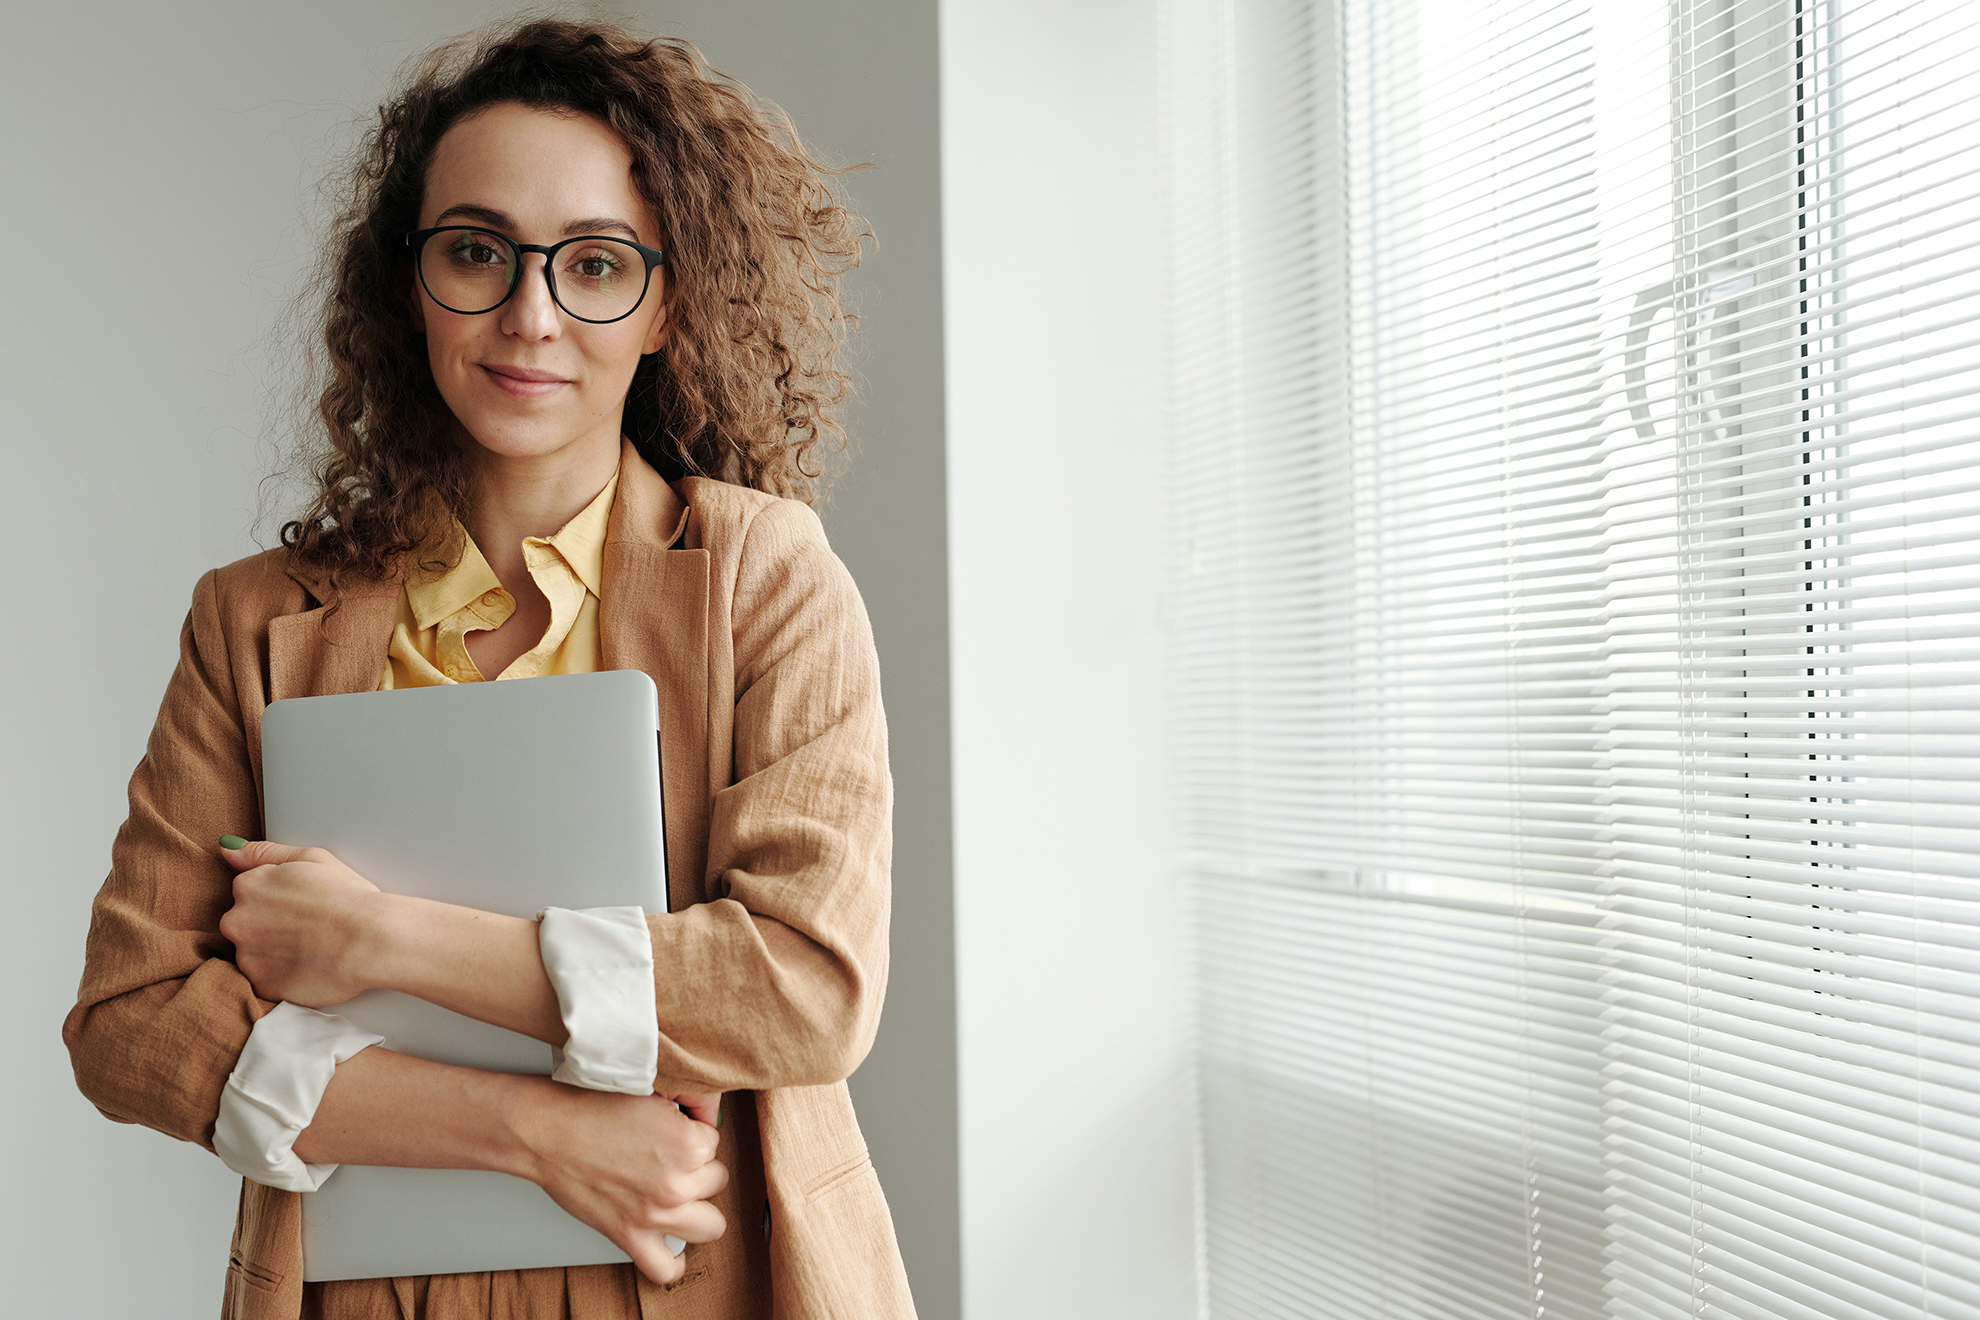 A picture of a woman with eyeglasses holding a laptop